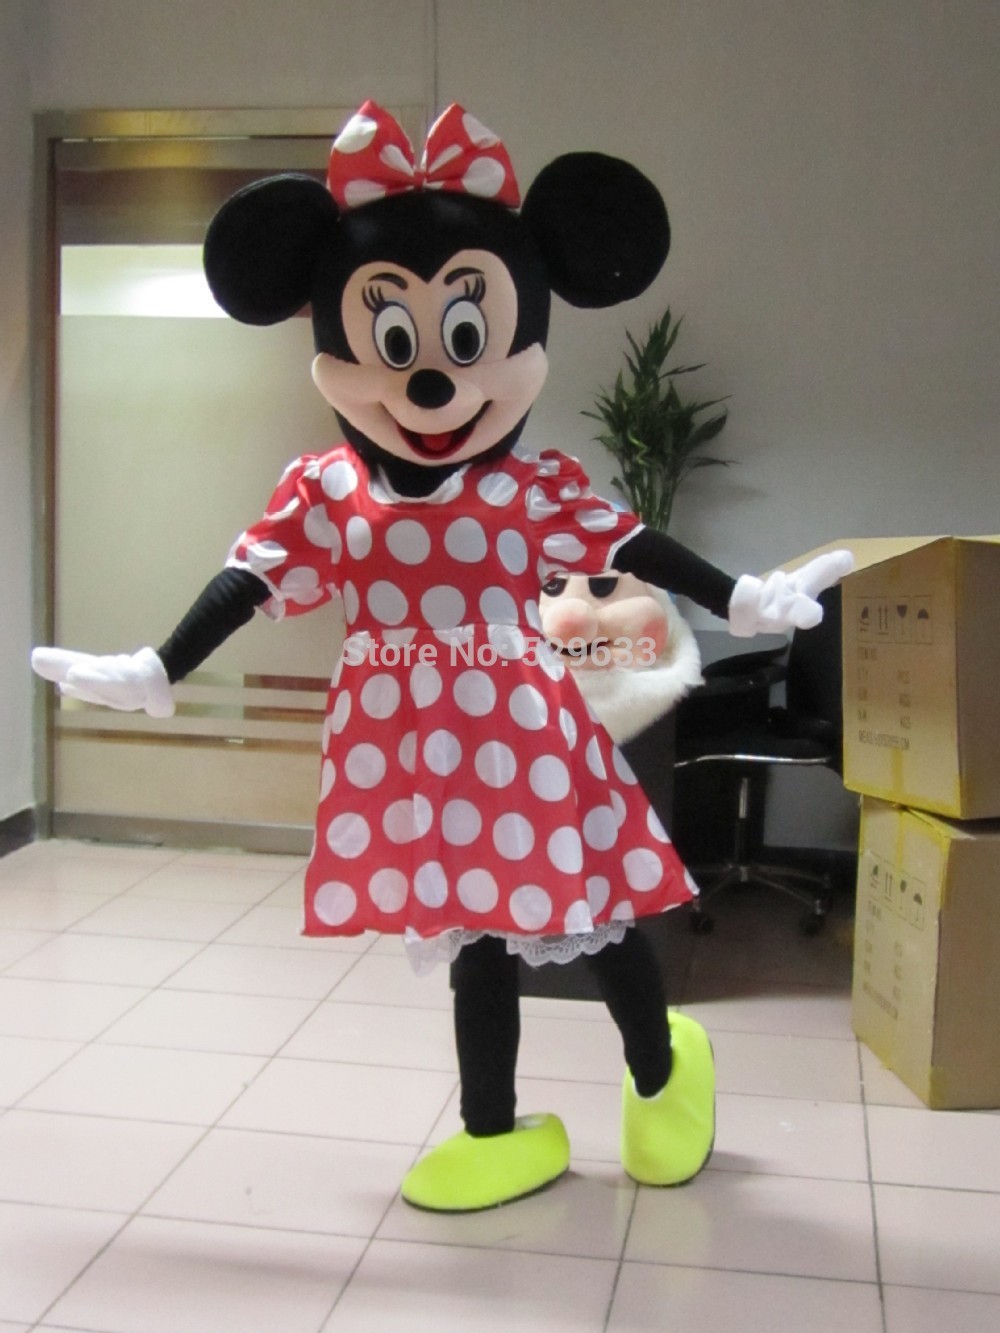 Fun Minnie Mouse Mascot Costume Adult Size Classic Minnie Mouse Cartoon Character Costumes Free Shipping